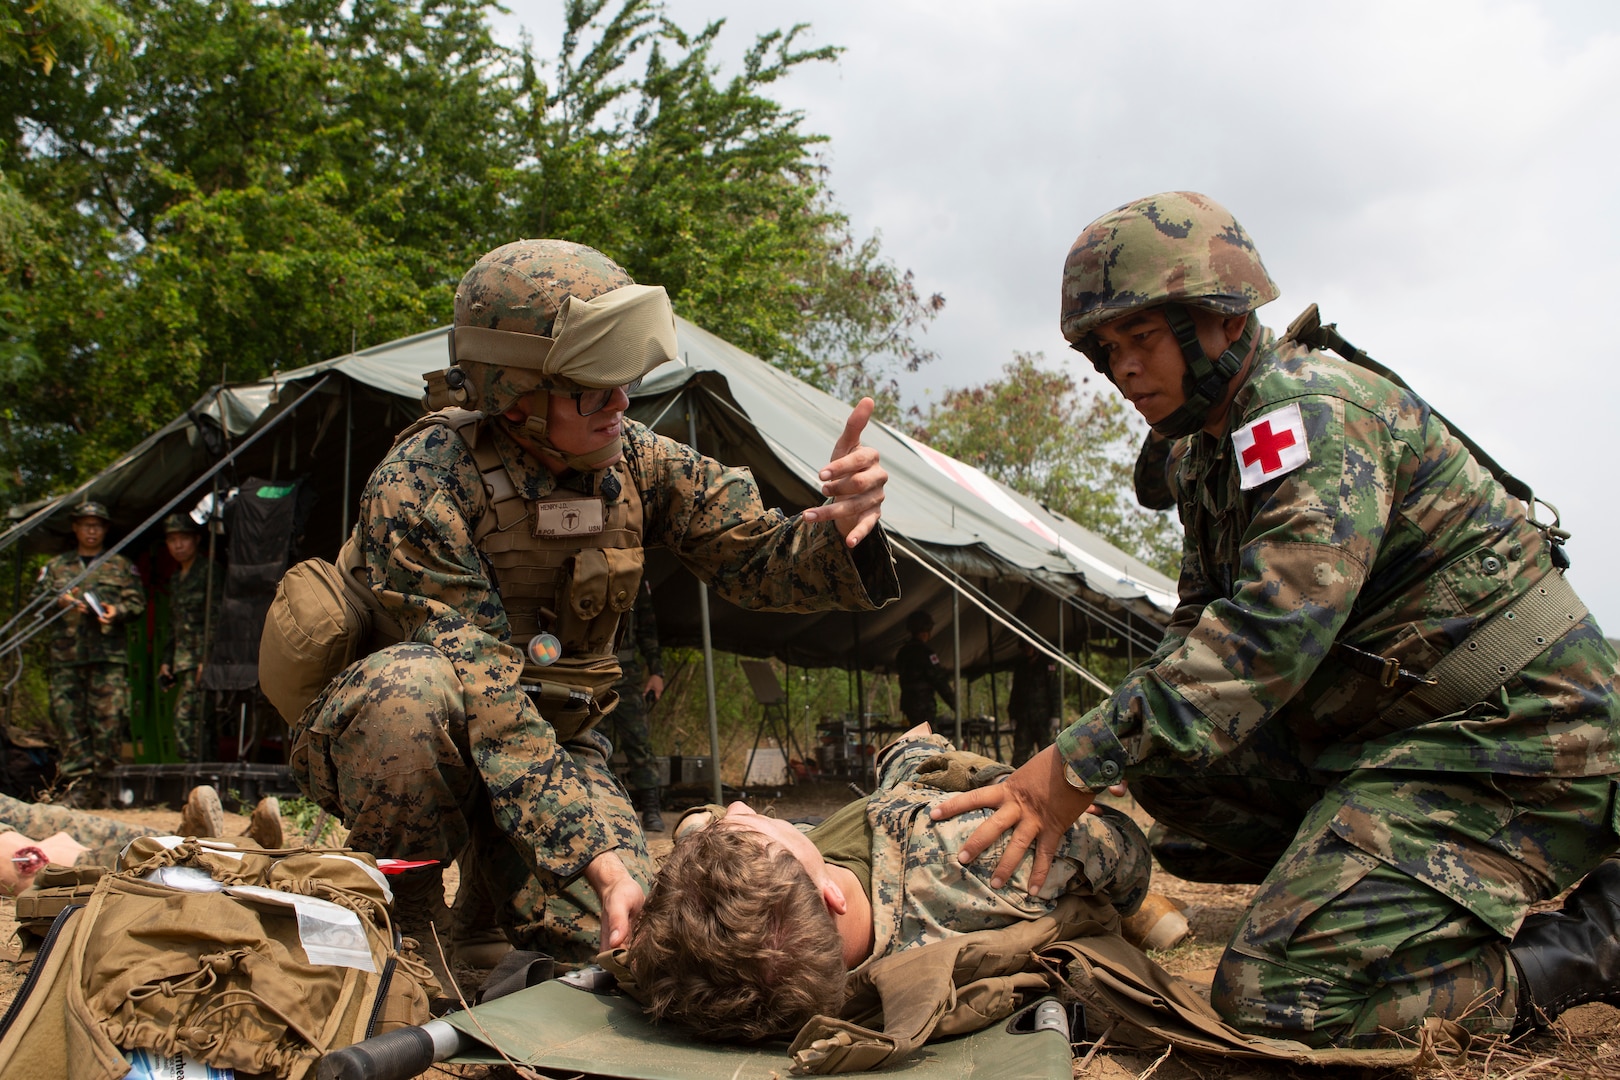 Marine aids Royal Thai sailor with simulated casualty while participating in mass casualty evacuation drill during exercise Cobra Gold 2020, at Hat Yao Beach, Sattahip, Kingdom of Thailand, February 27, 2020 (U.S. Marine Corps/Hannah Hall)